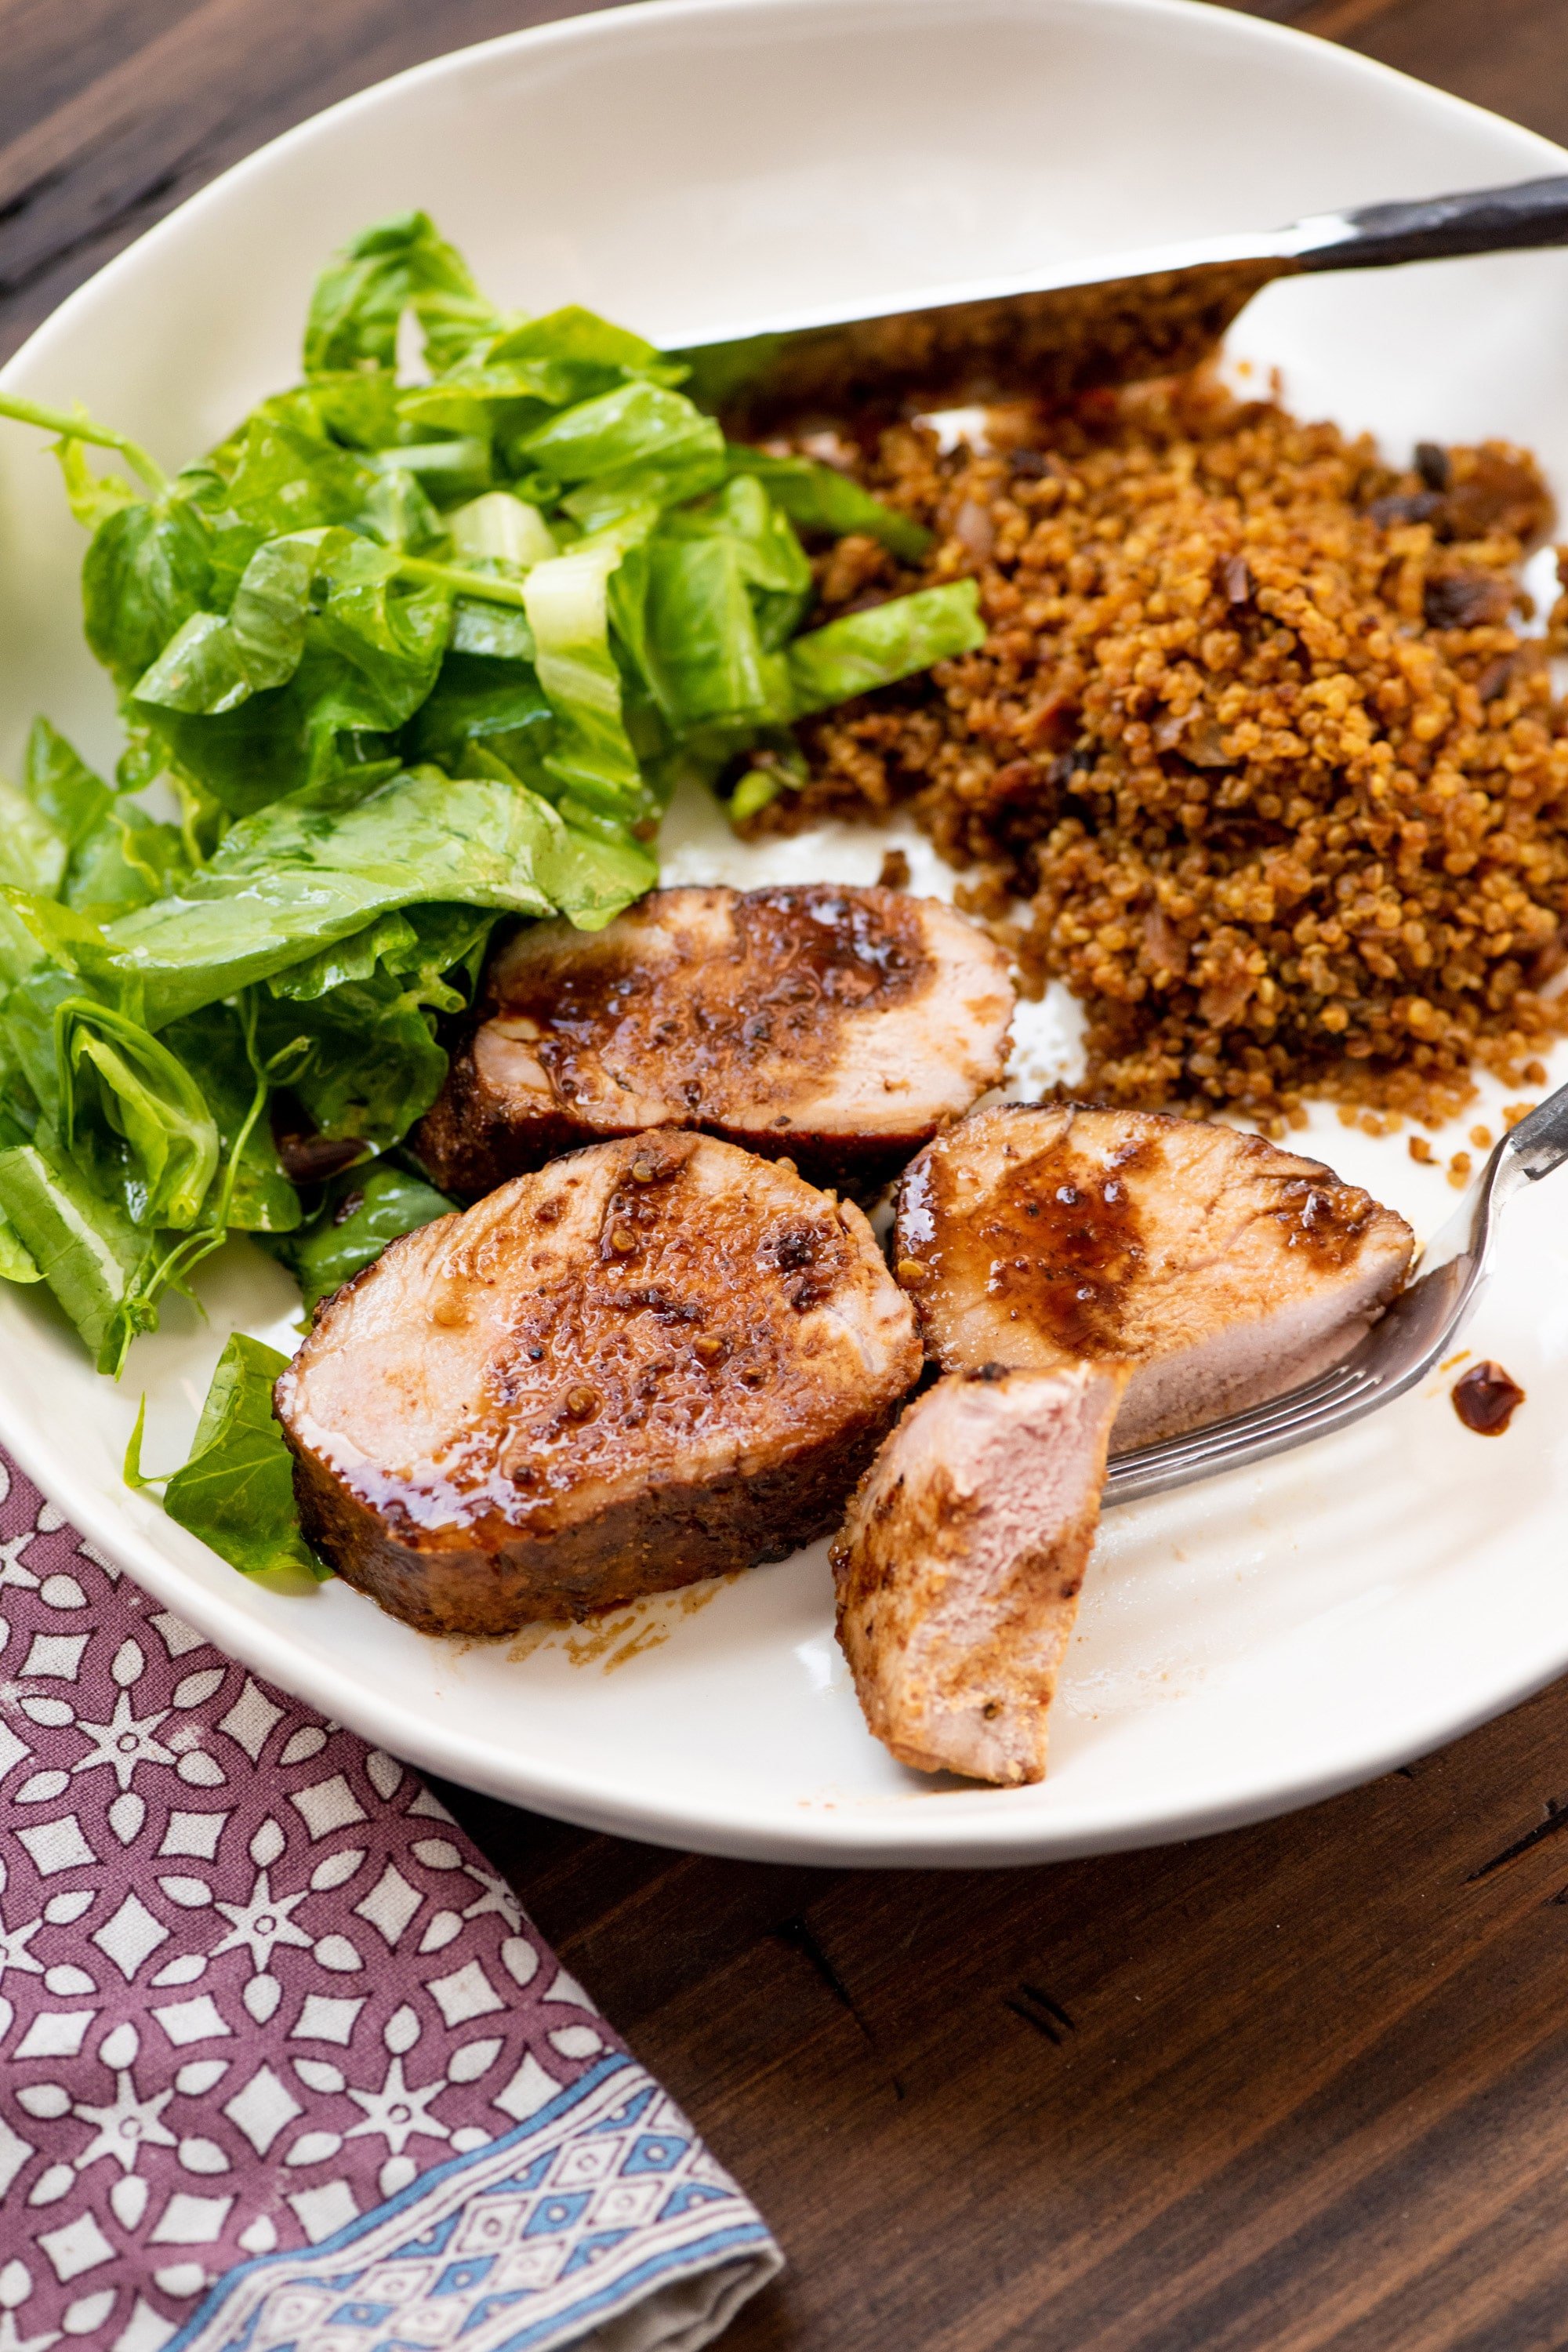 Slices of Dijon and Honey Crusted Pork Tenderloin on a plate with salad and grains.